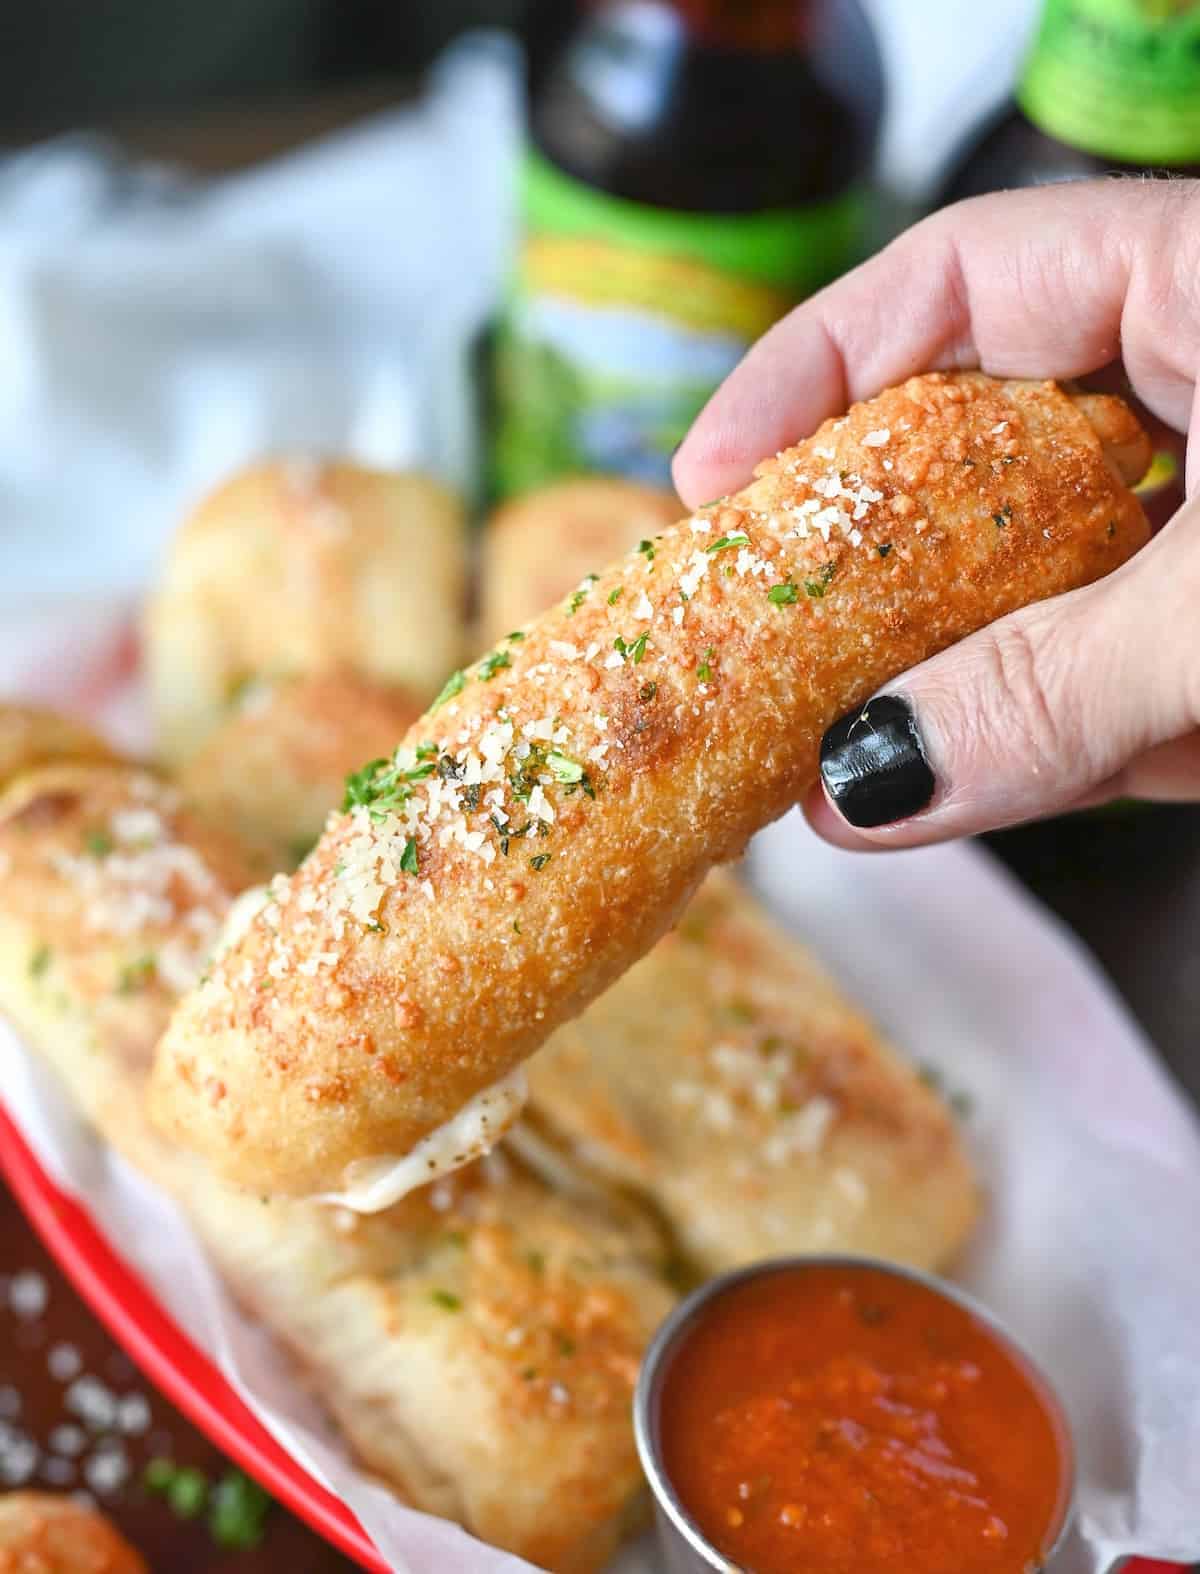 Stuffed pepperoni breadstick being picked up from a red serving basket with a side of pizza sauce.